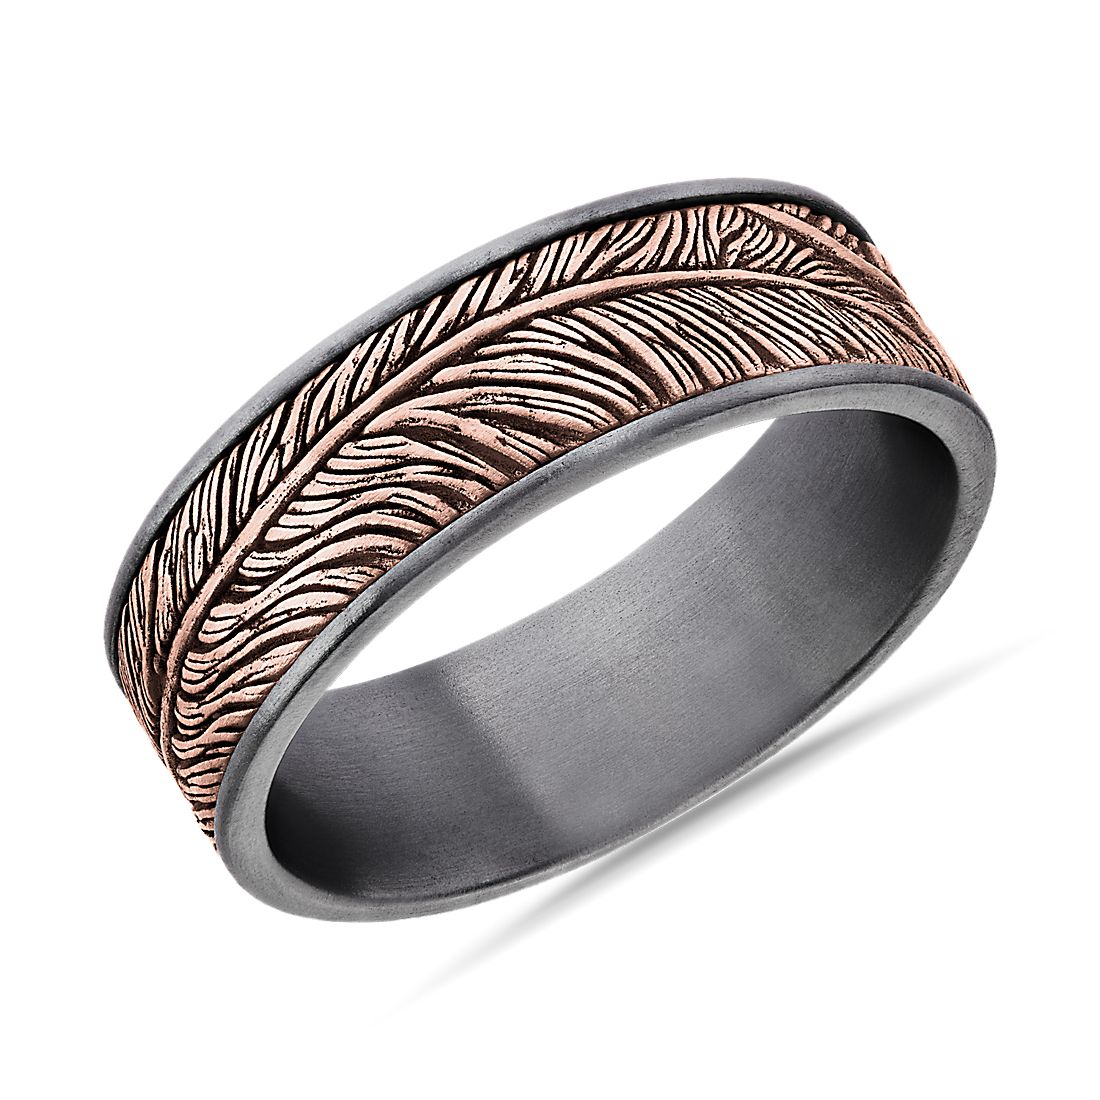 Feather Wedding Ring in 14k Rose Gold and Tantalum Edge (7.5 mm)